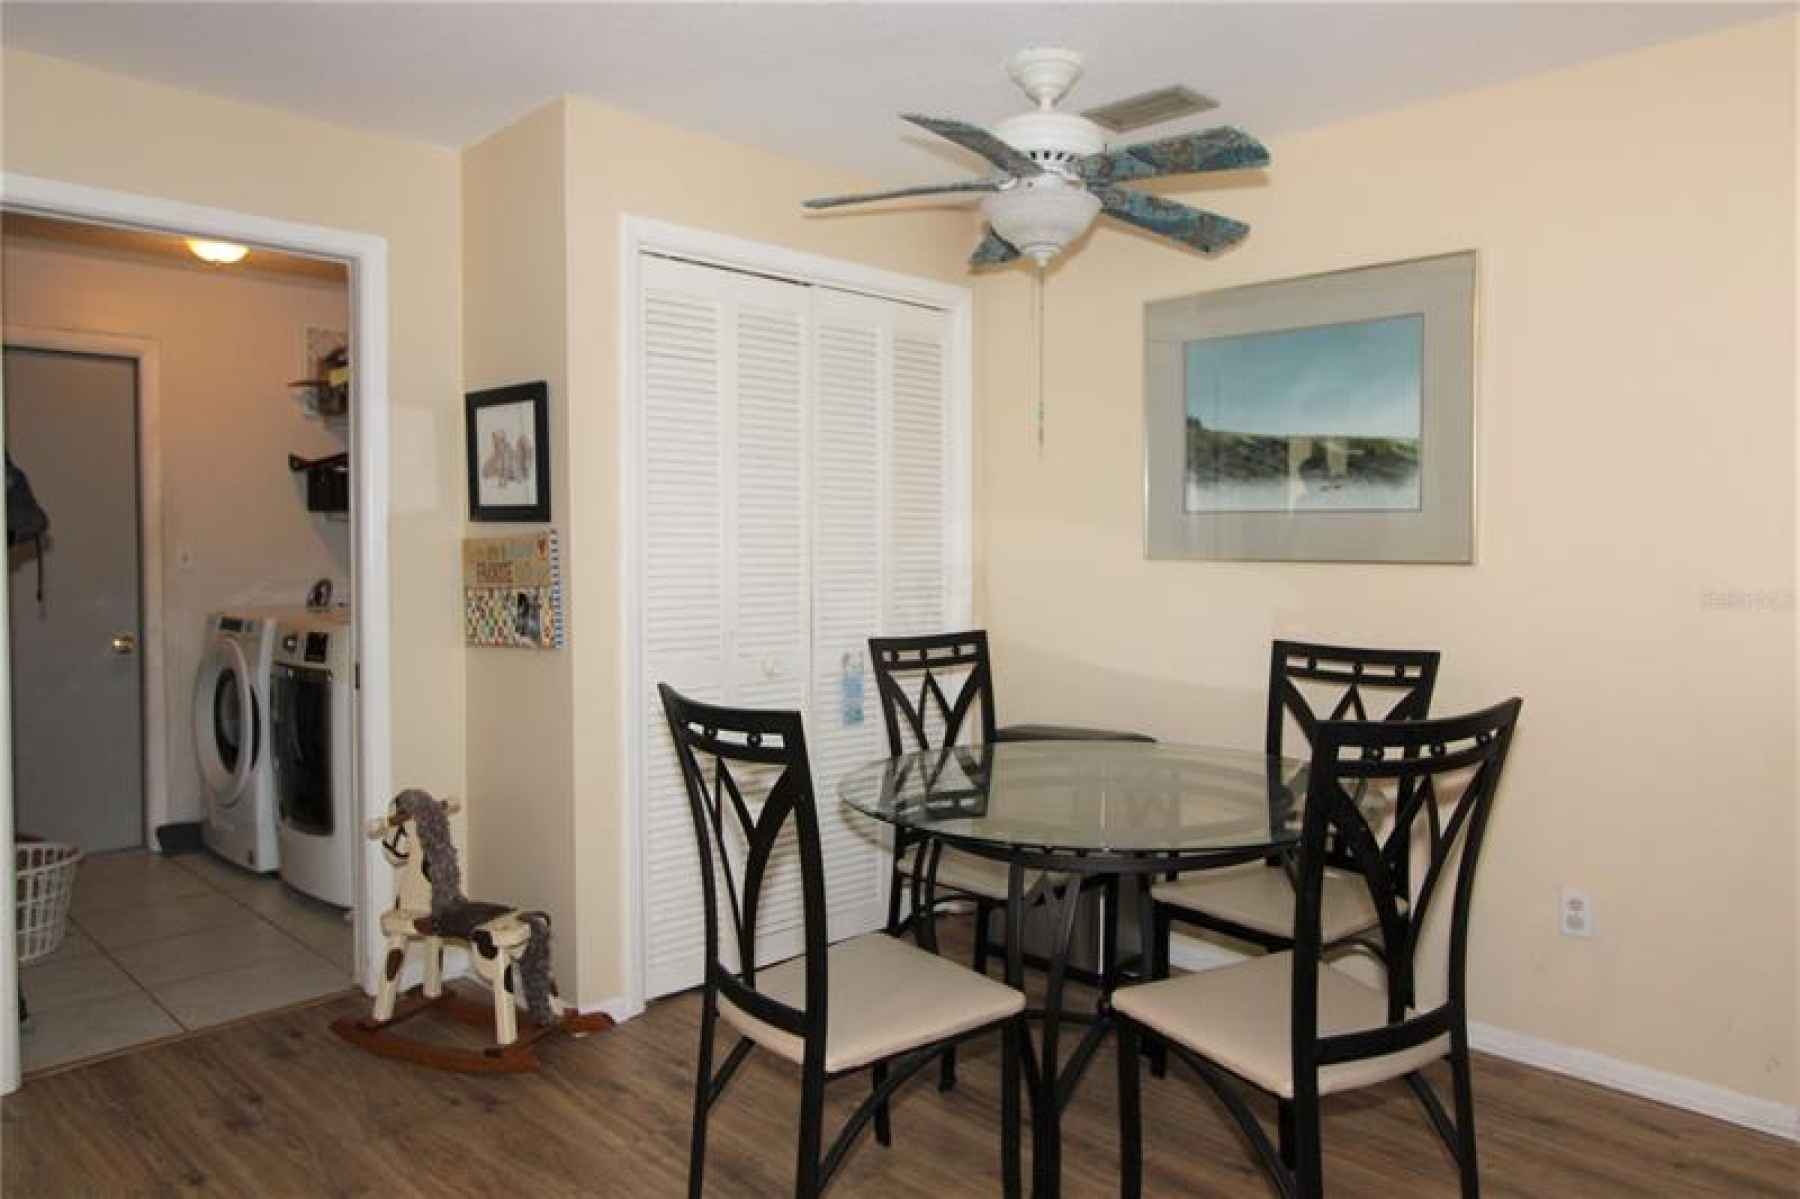 Family room dining area